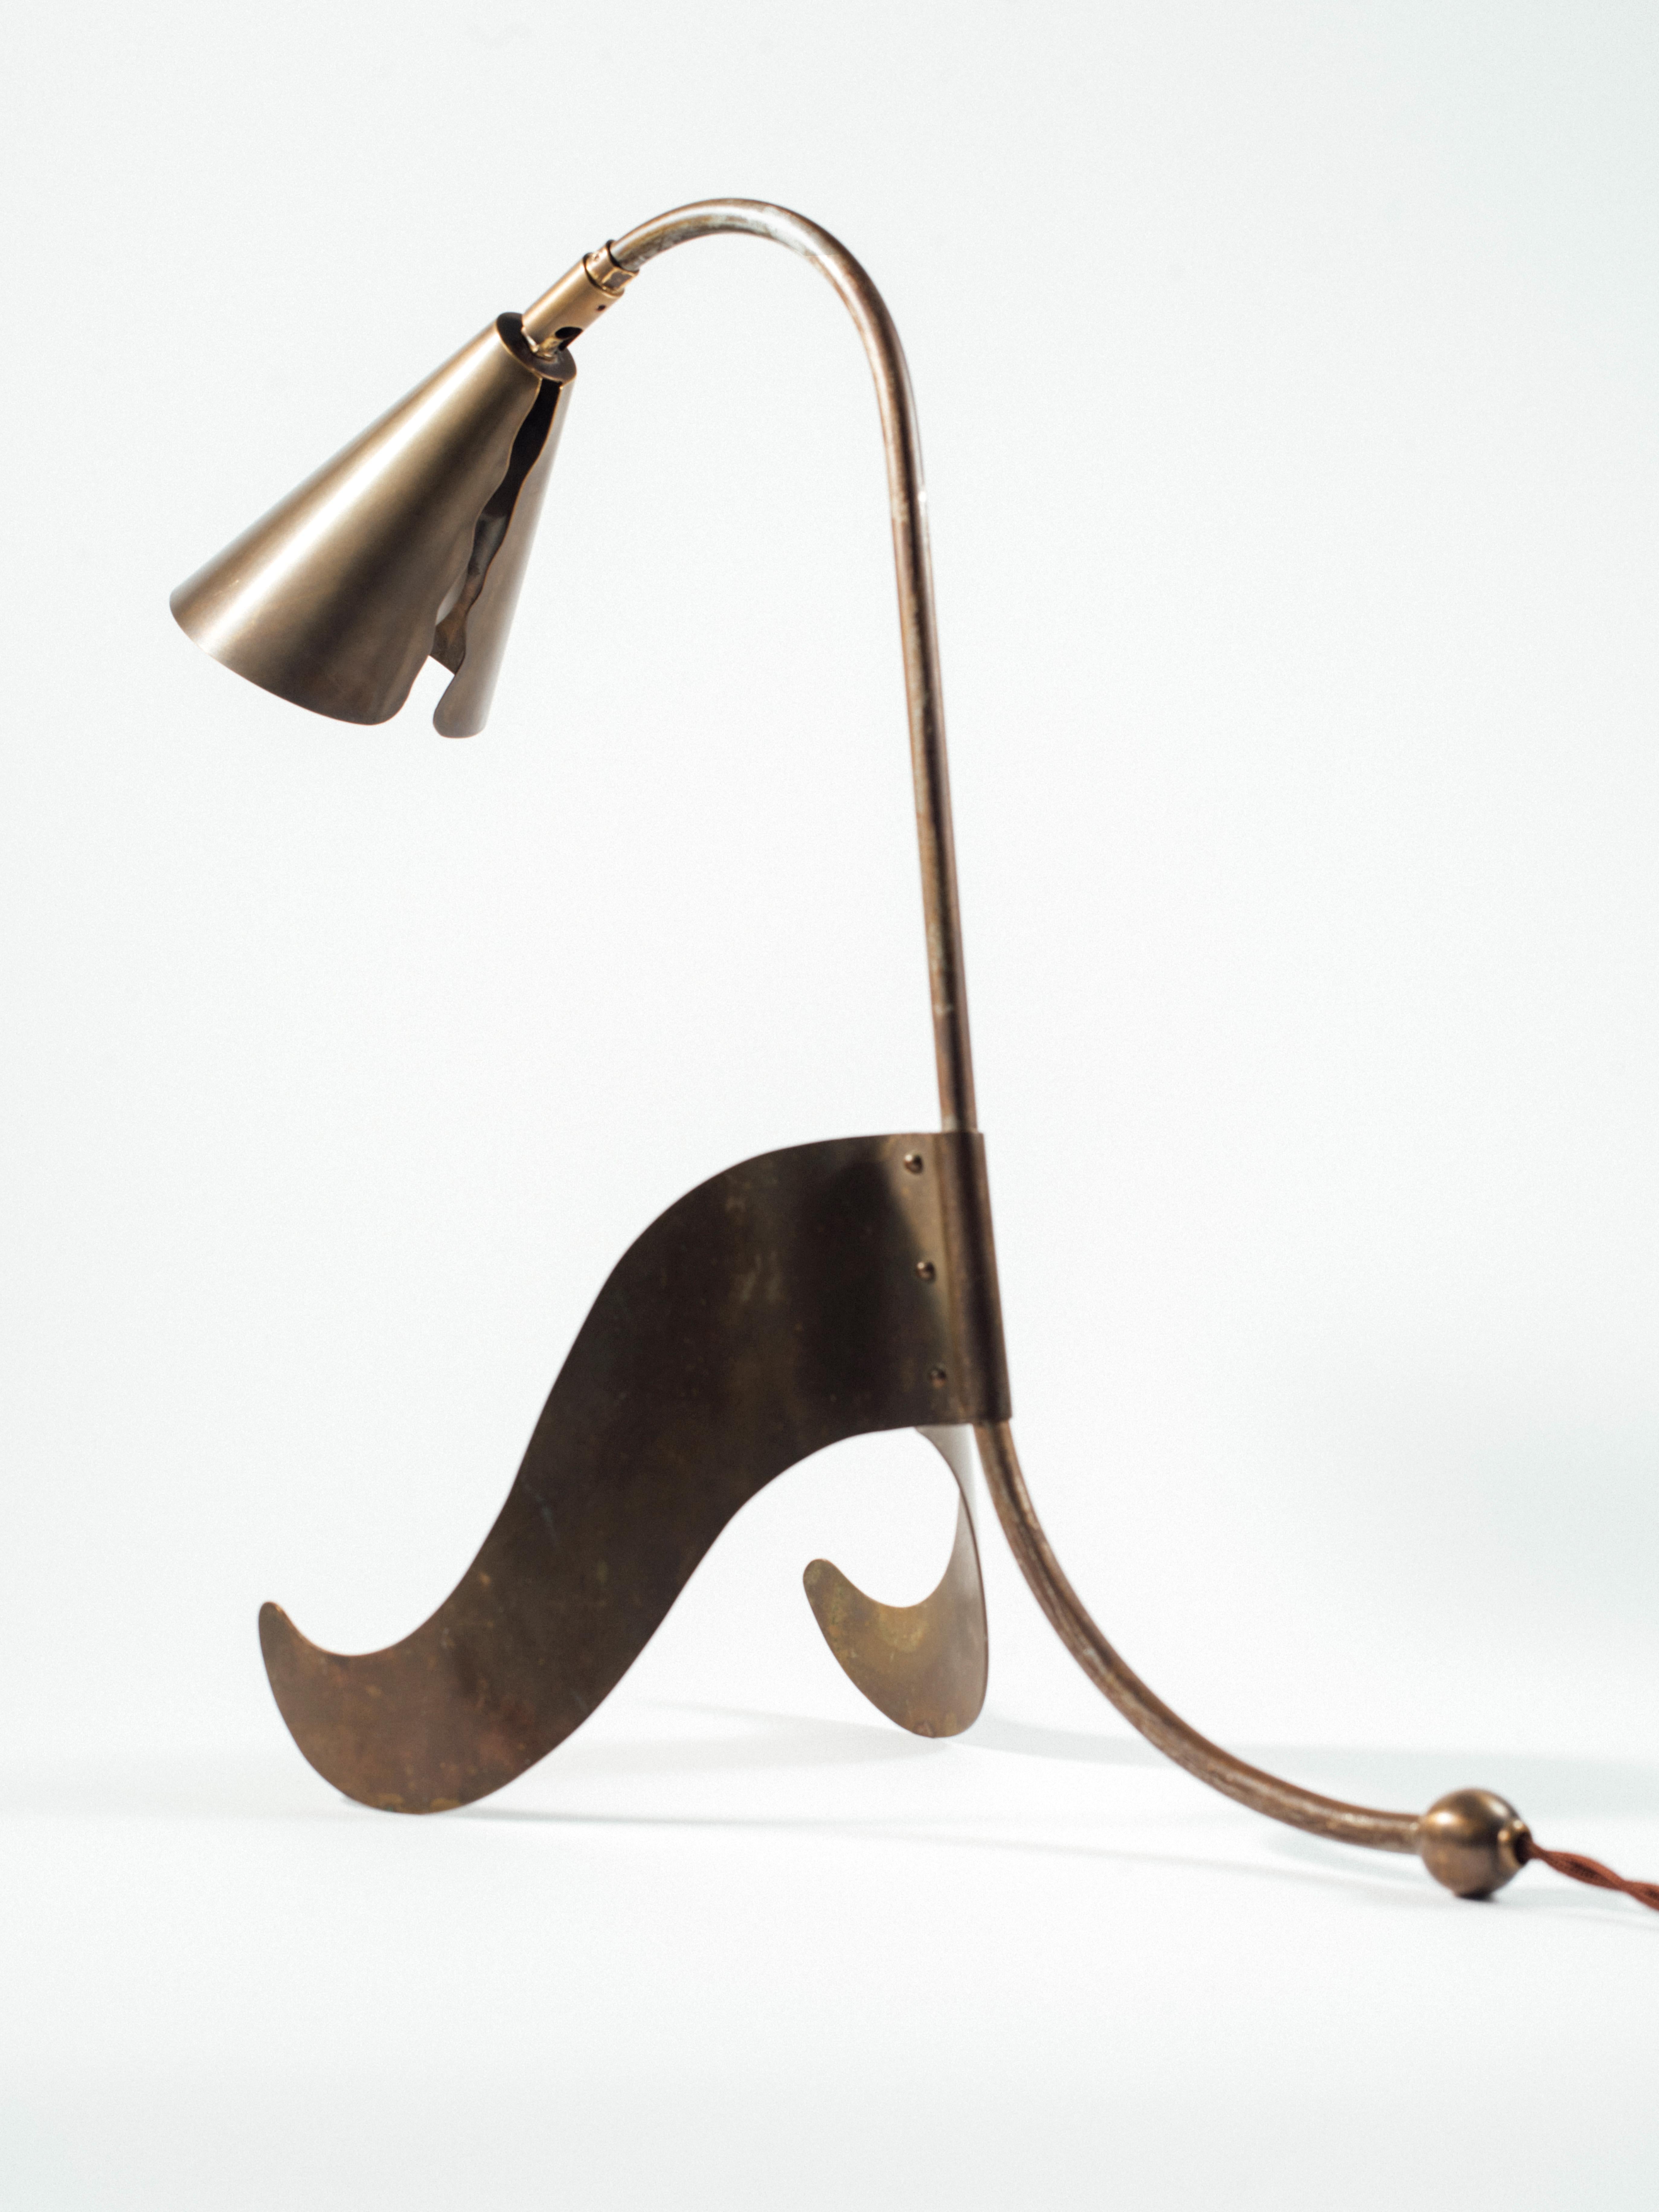 A desk lamp with a lyrically bent frame in patinated steel and a conical, articulating shade, front legs and spherical counterweight, all in solid, patinated brass. The sinuous cut-away section at the rear of the light shade both mimics the shape of